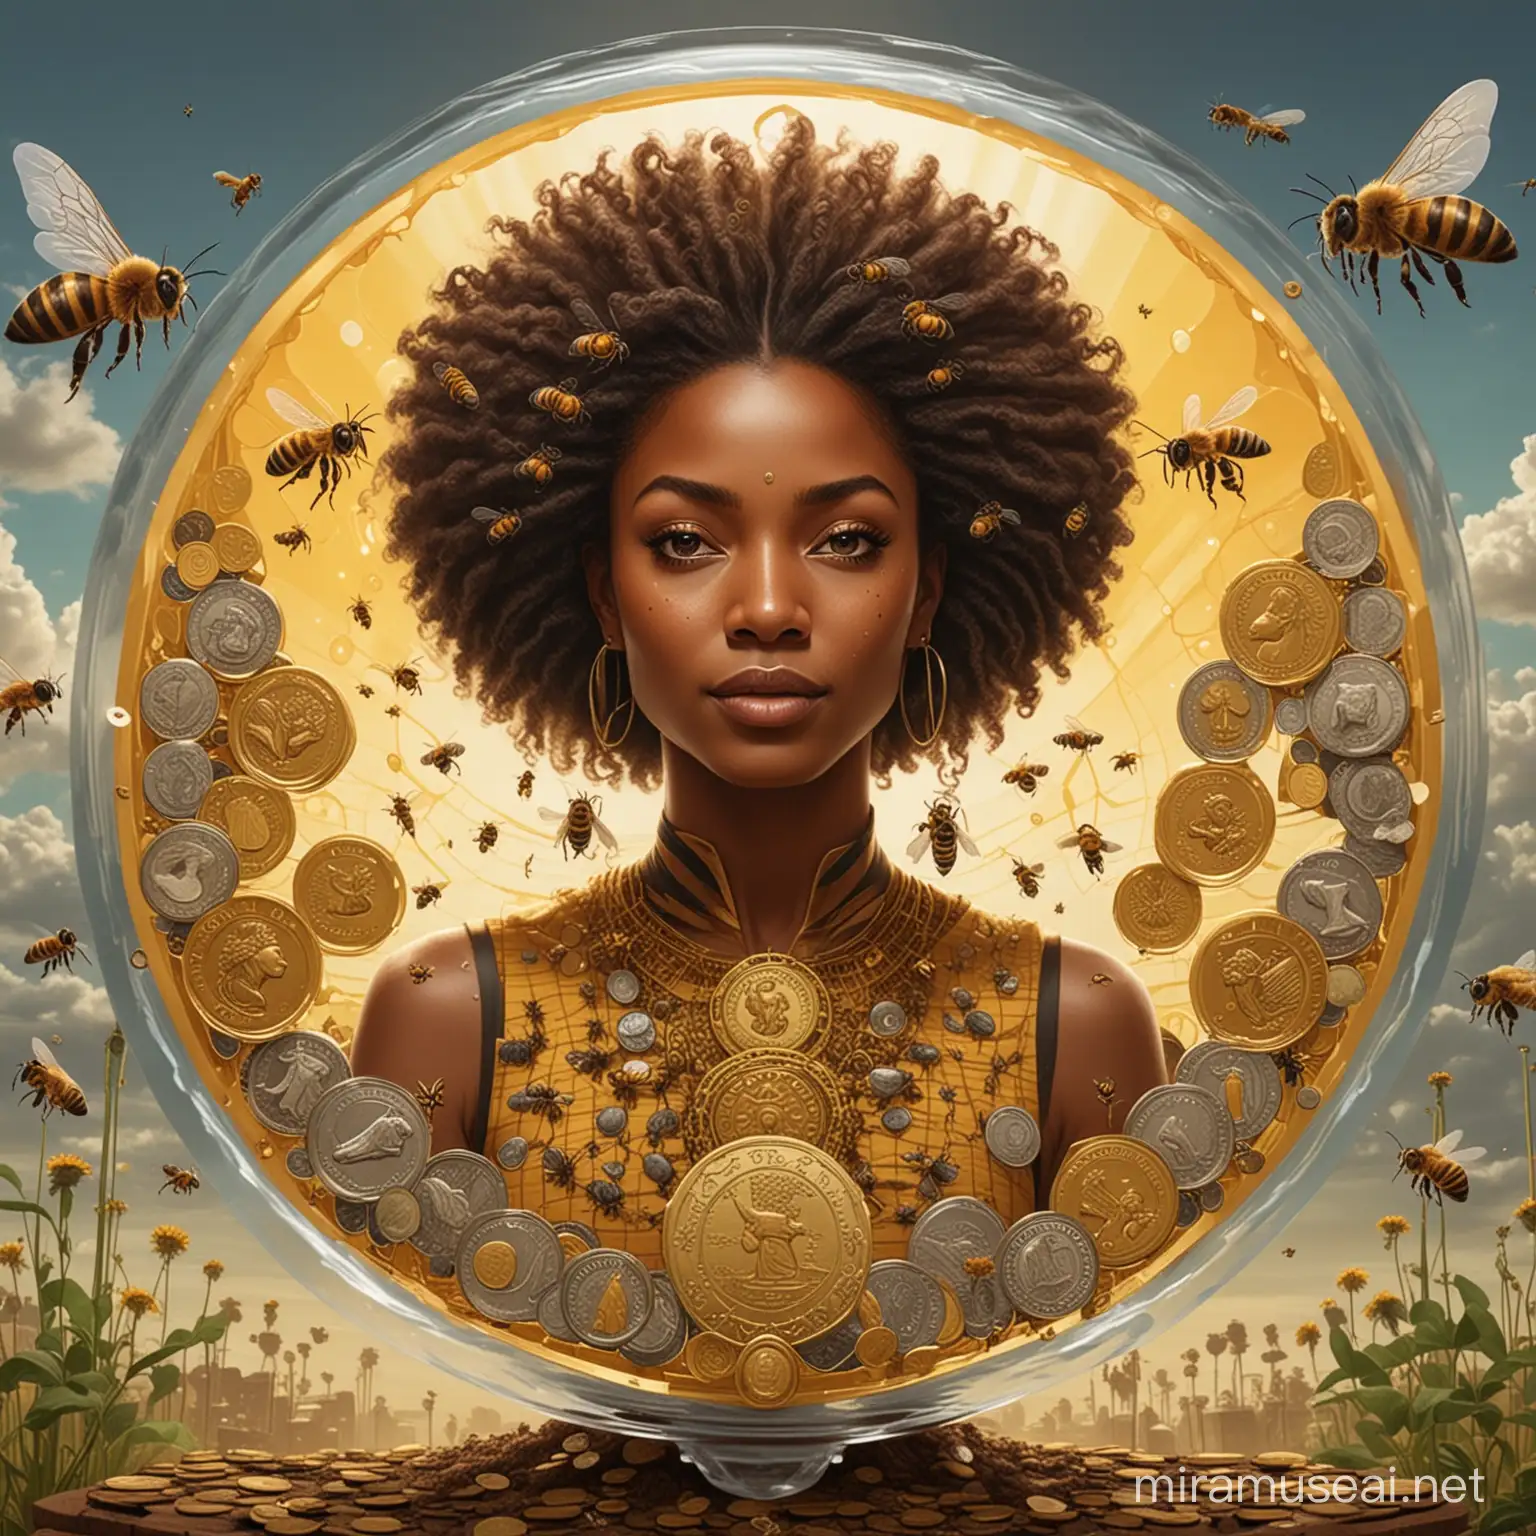 Create a tarot card that has 10 of coins energy and 10 honeybees on coin discs as money falls from the sky and an Afro-Indigenous queen bee in the center with 10 beehives surrounding her. The background is moden industrious 2030 setting 